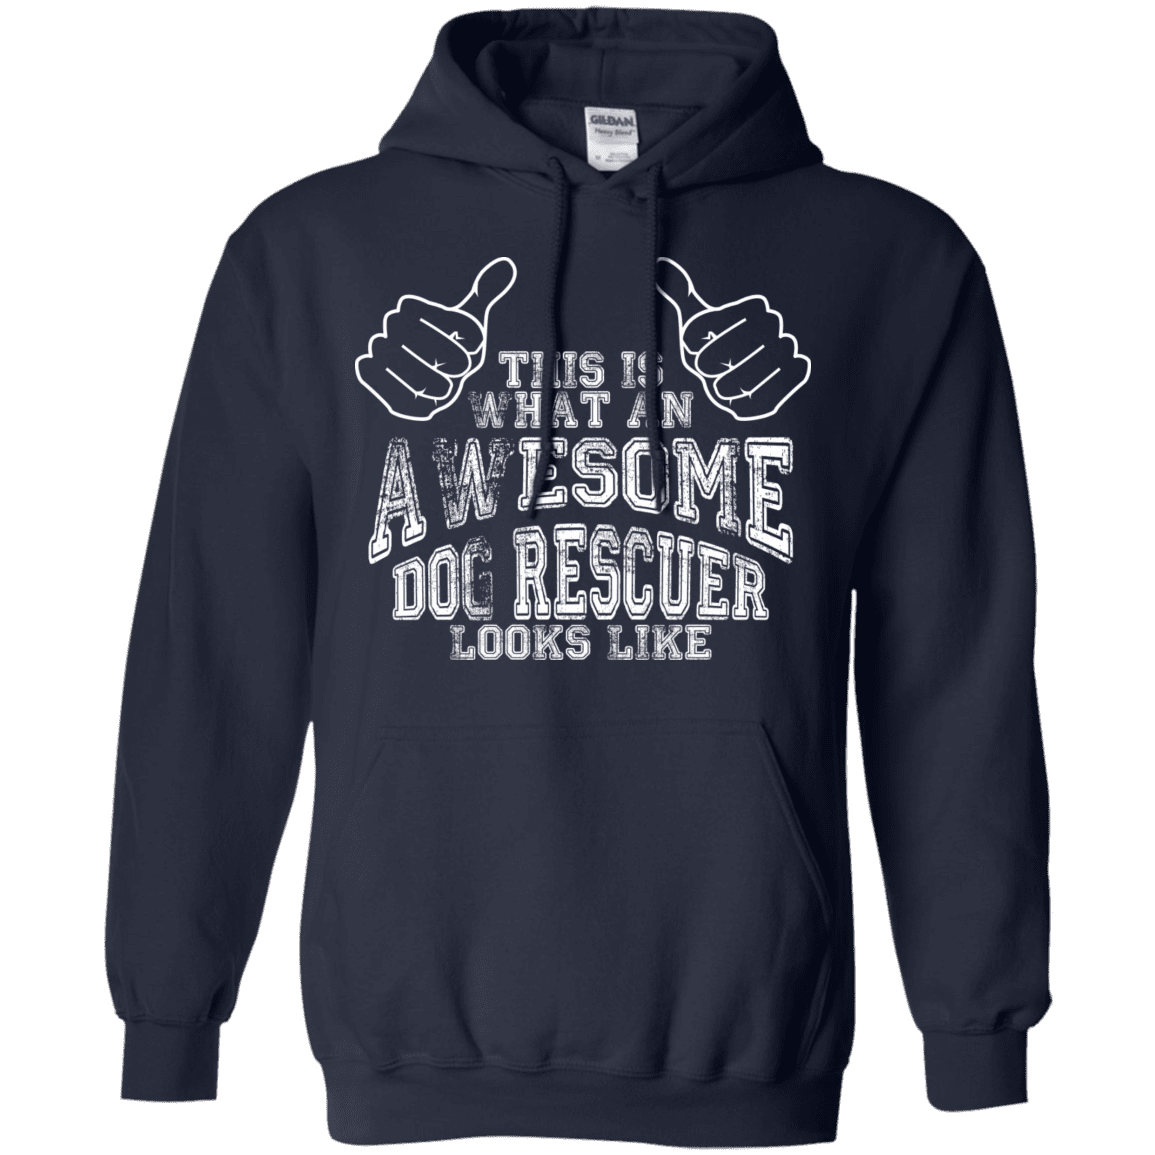 Awesome Dog Rescuer - Hoodie.